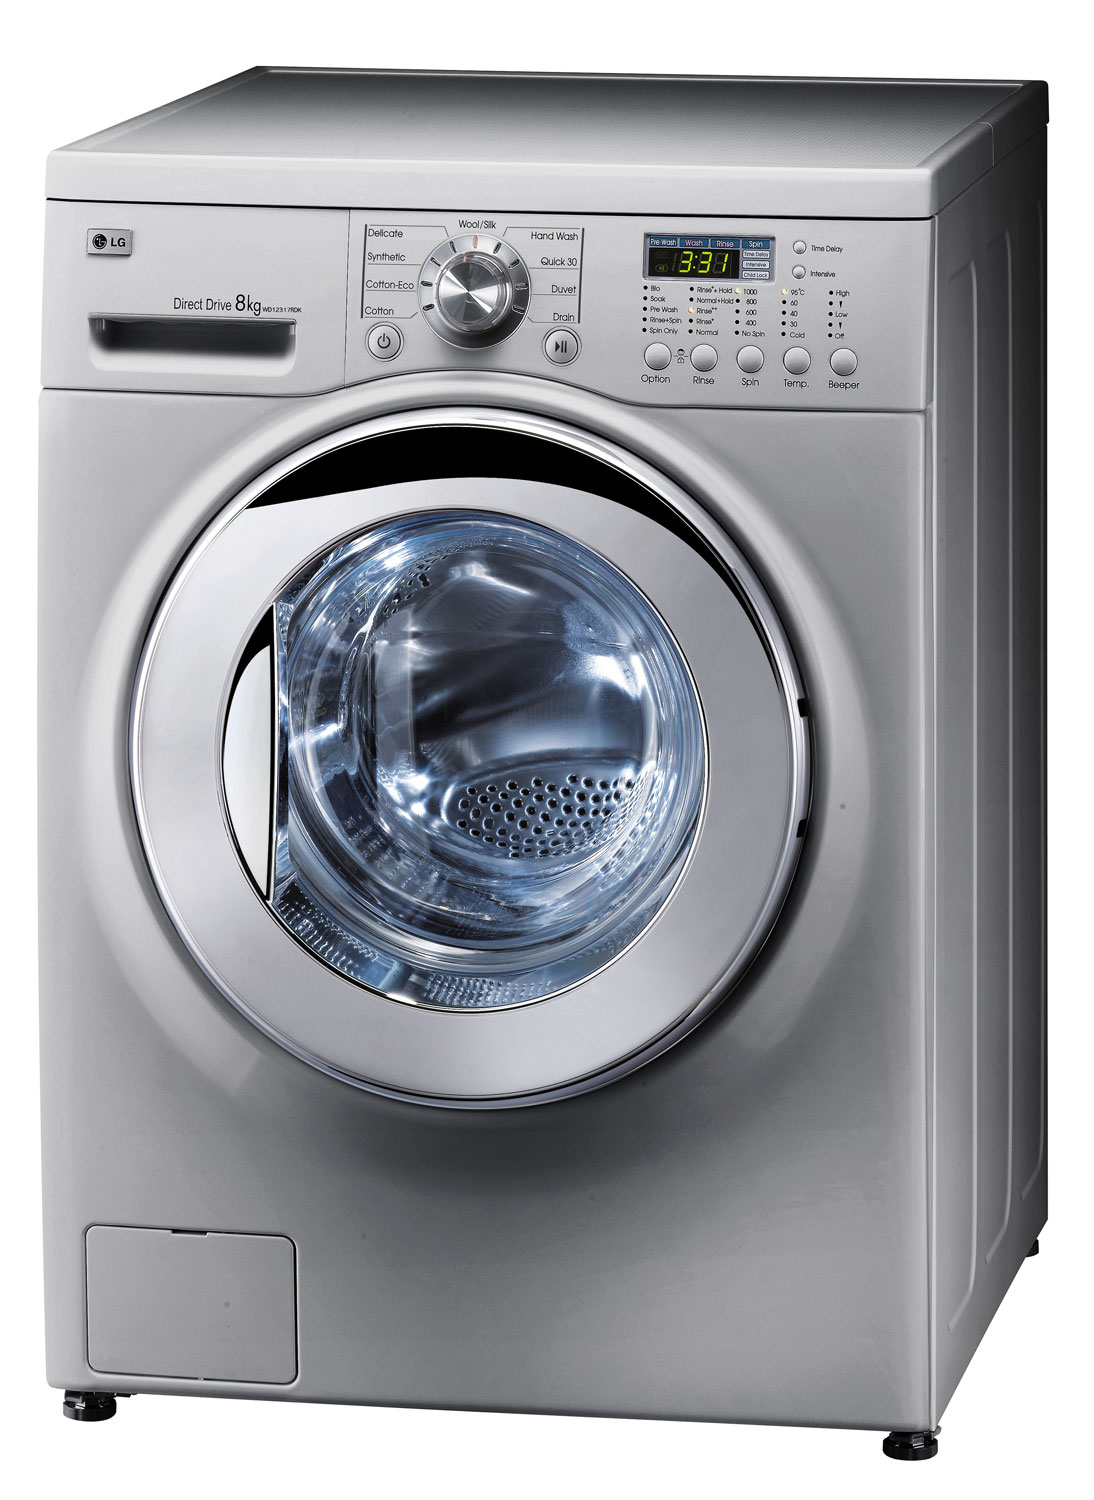 Washing Dryers Machines - Download Images, Photos and ...